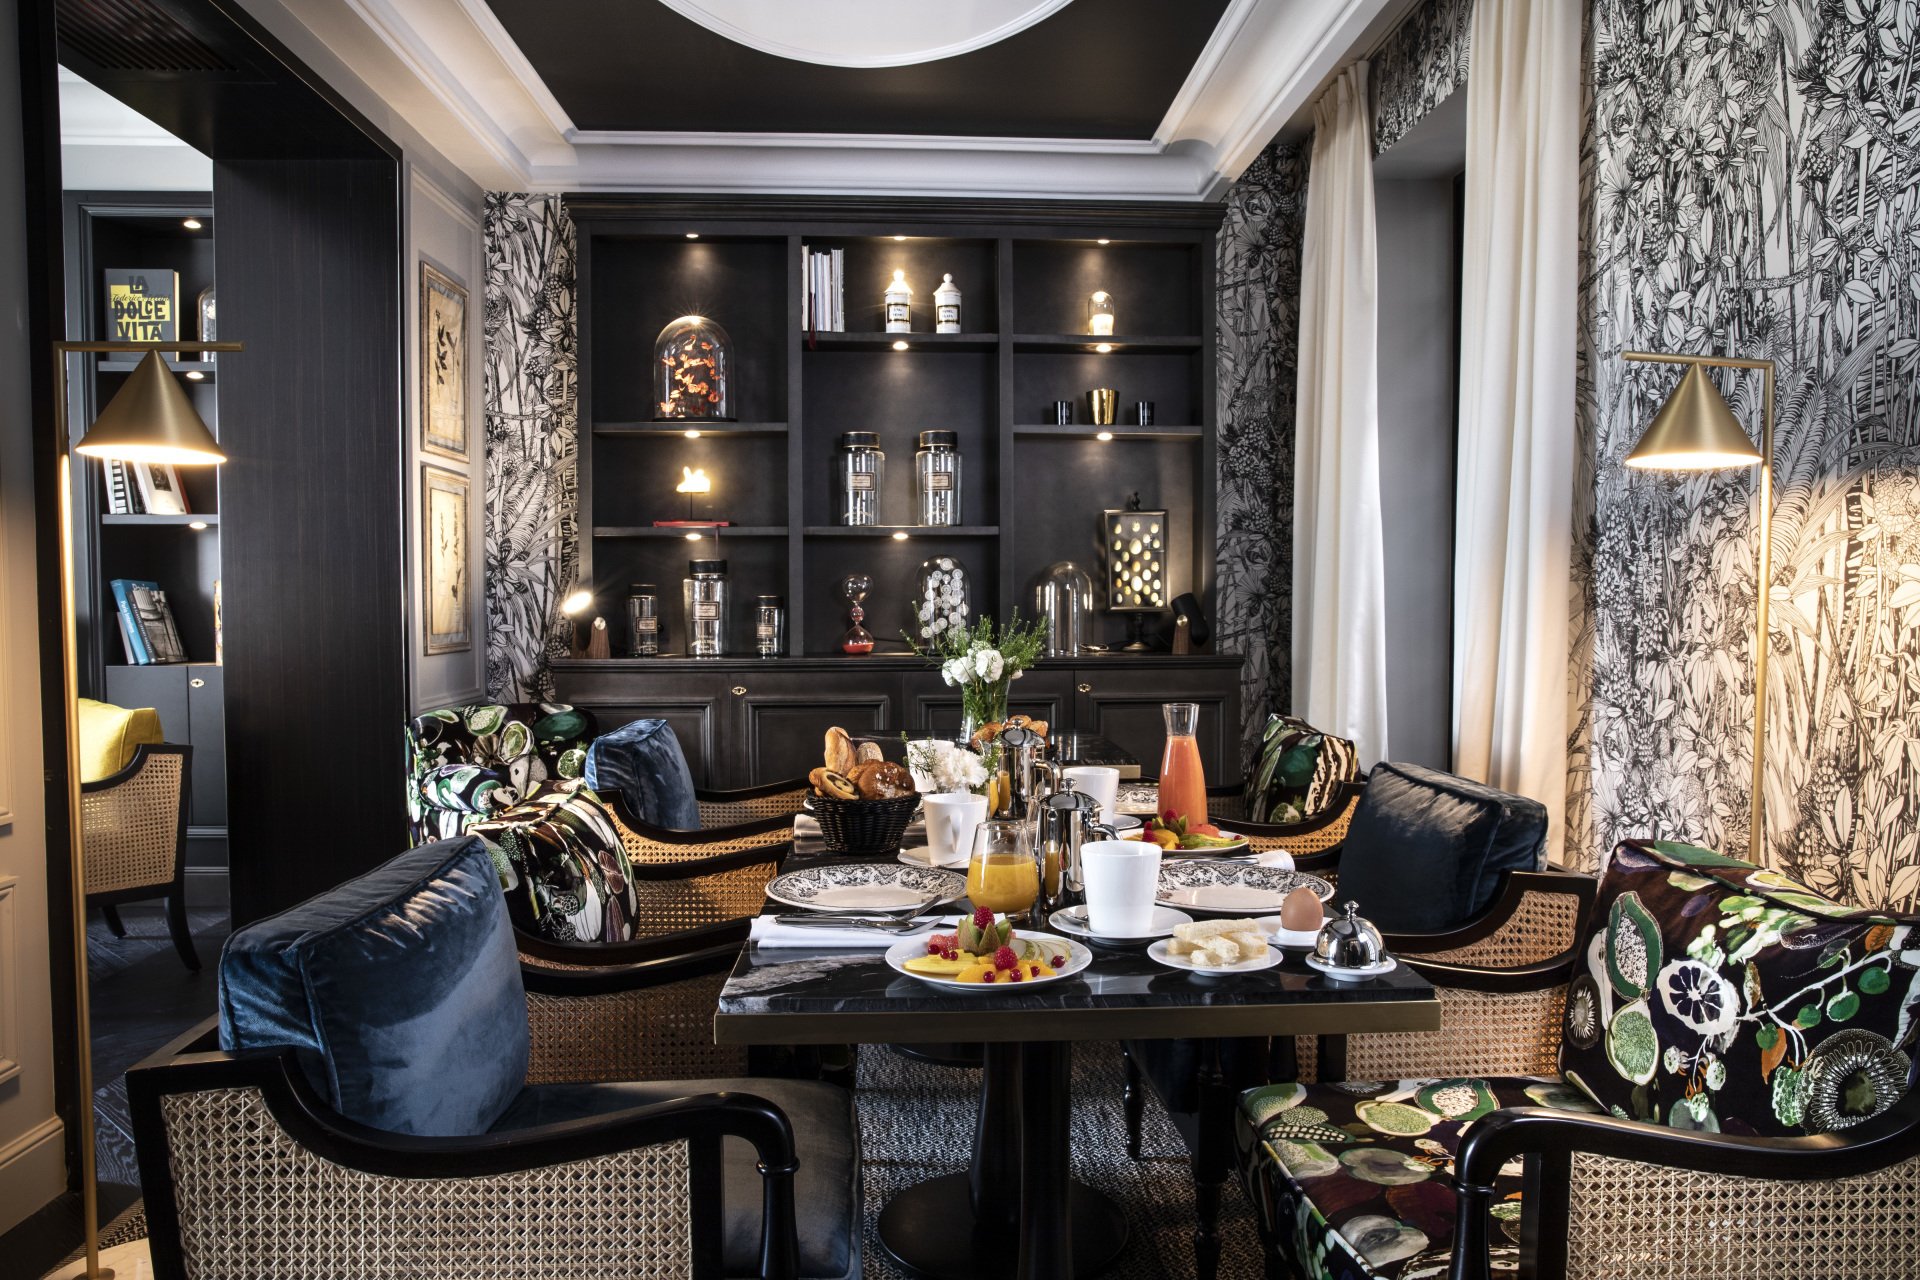 Main room of the restaurant Hotel Le Damantin in Paris designed by the French interior design studio jean-philippe nuel, with singular black and yellow decoration, flowery atmosphere like a winter garden